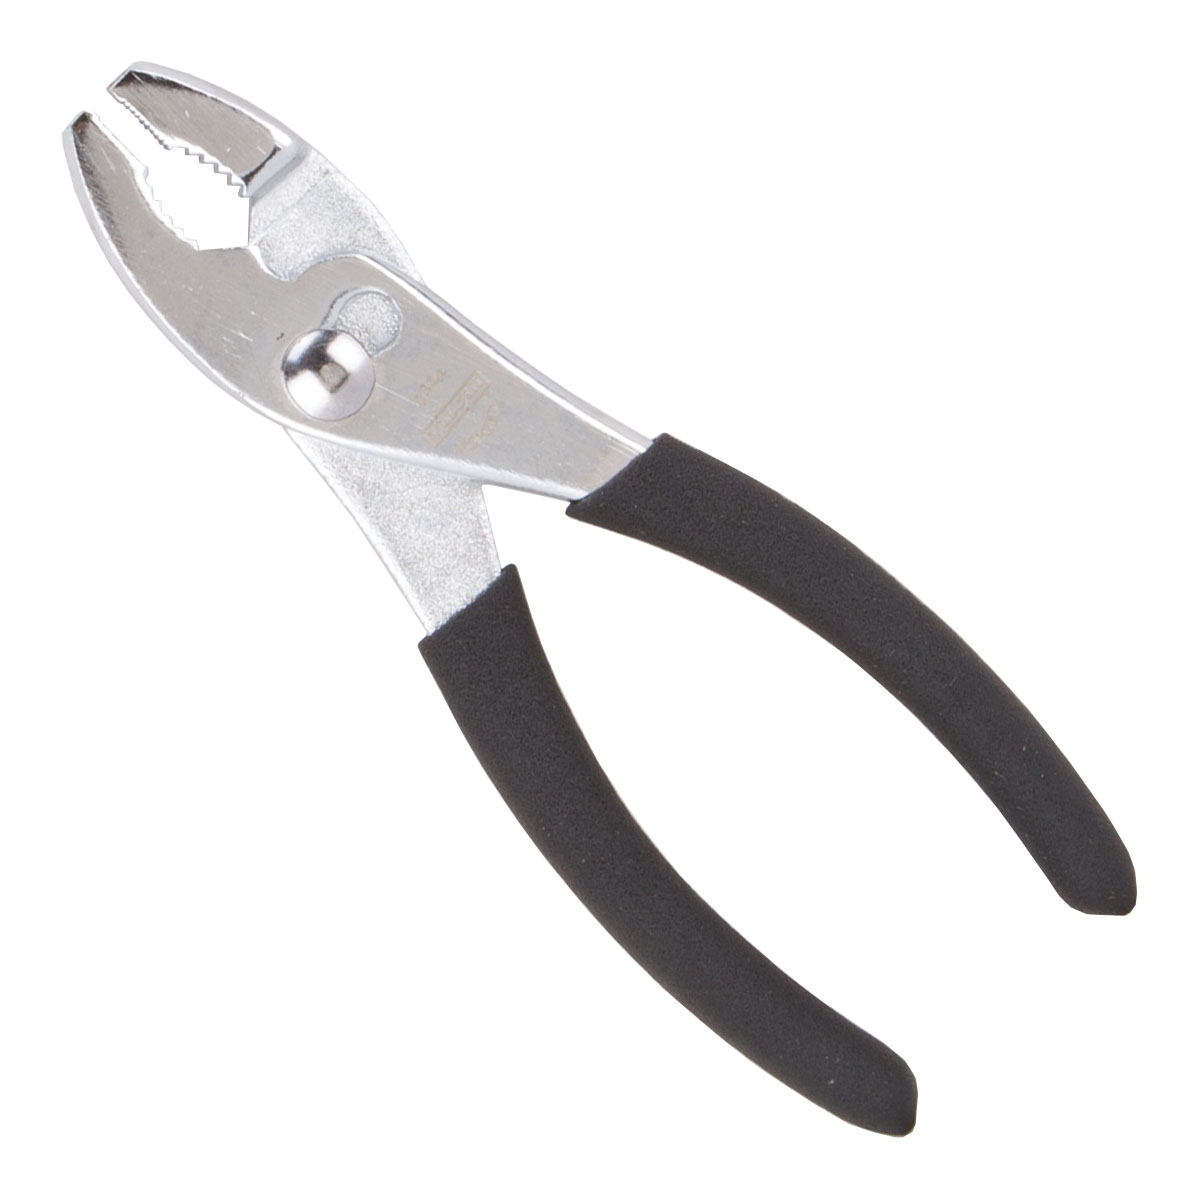 JL-NP003 Slip Joint Plier, 6 in OAL, 1 in Jaw Opening, Black Handle, Non-Slip Handle, 1 in W Jaw, 7/8 in L Jaw